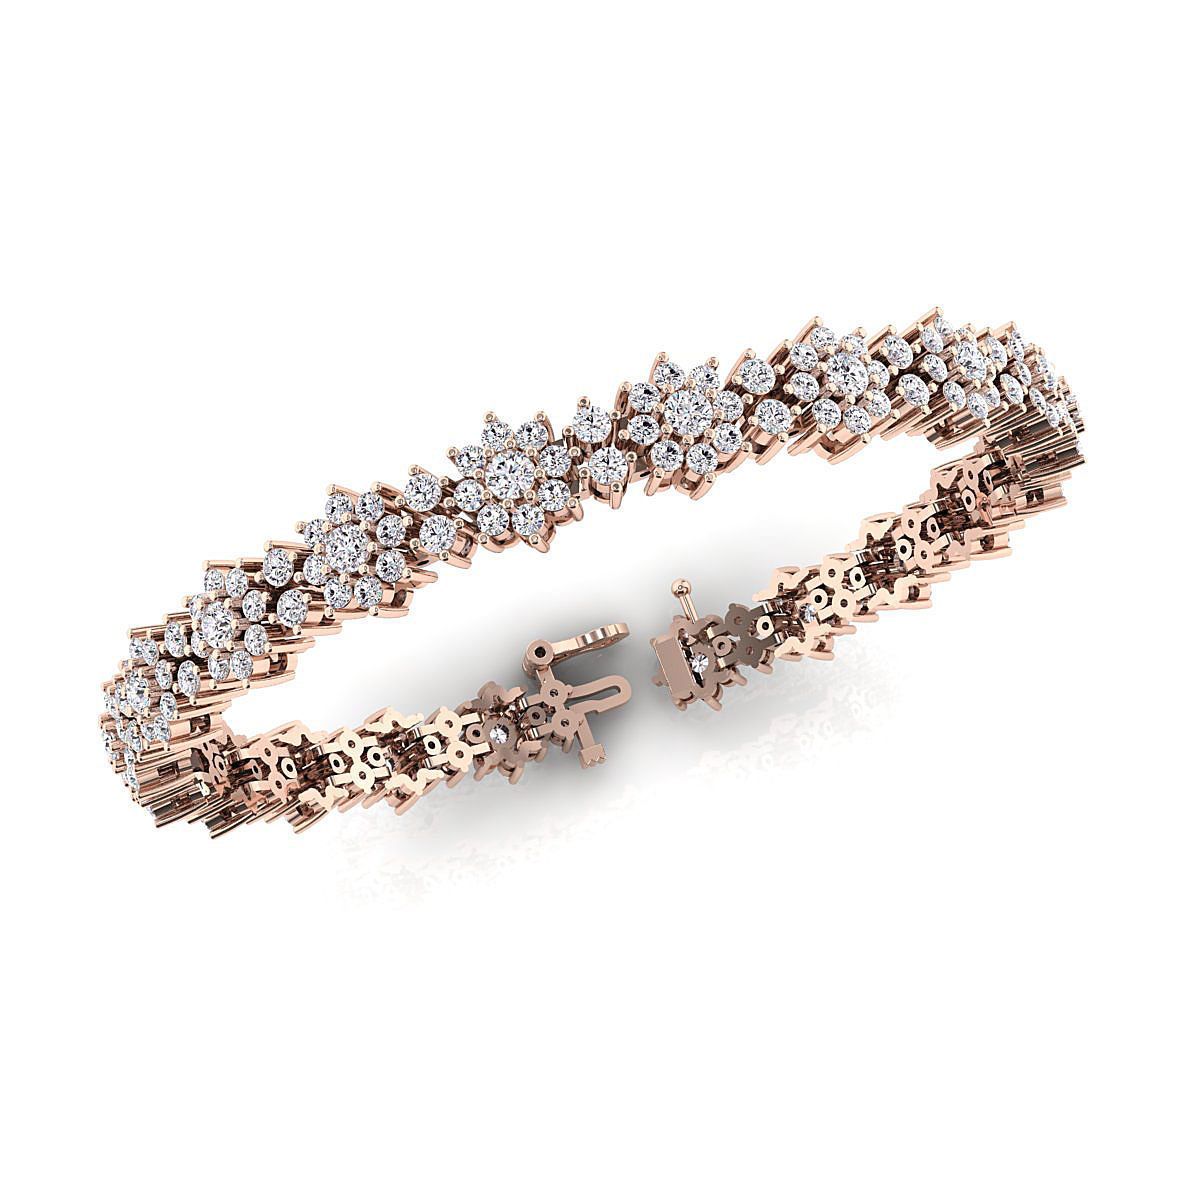 Moissanite bracelet in gold and sterling silver